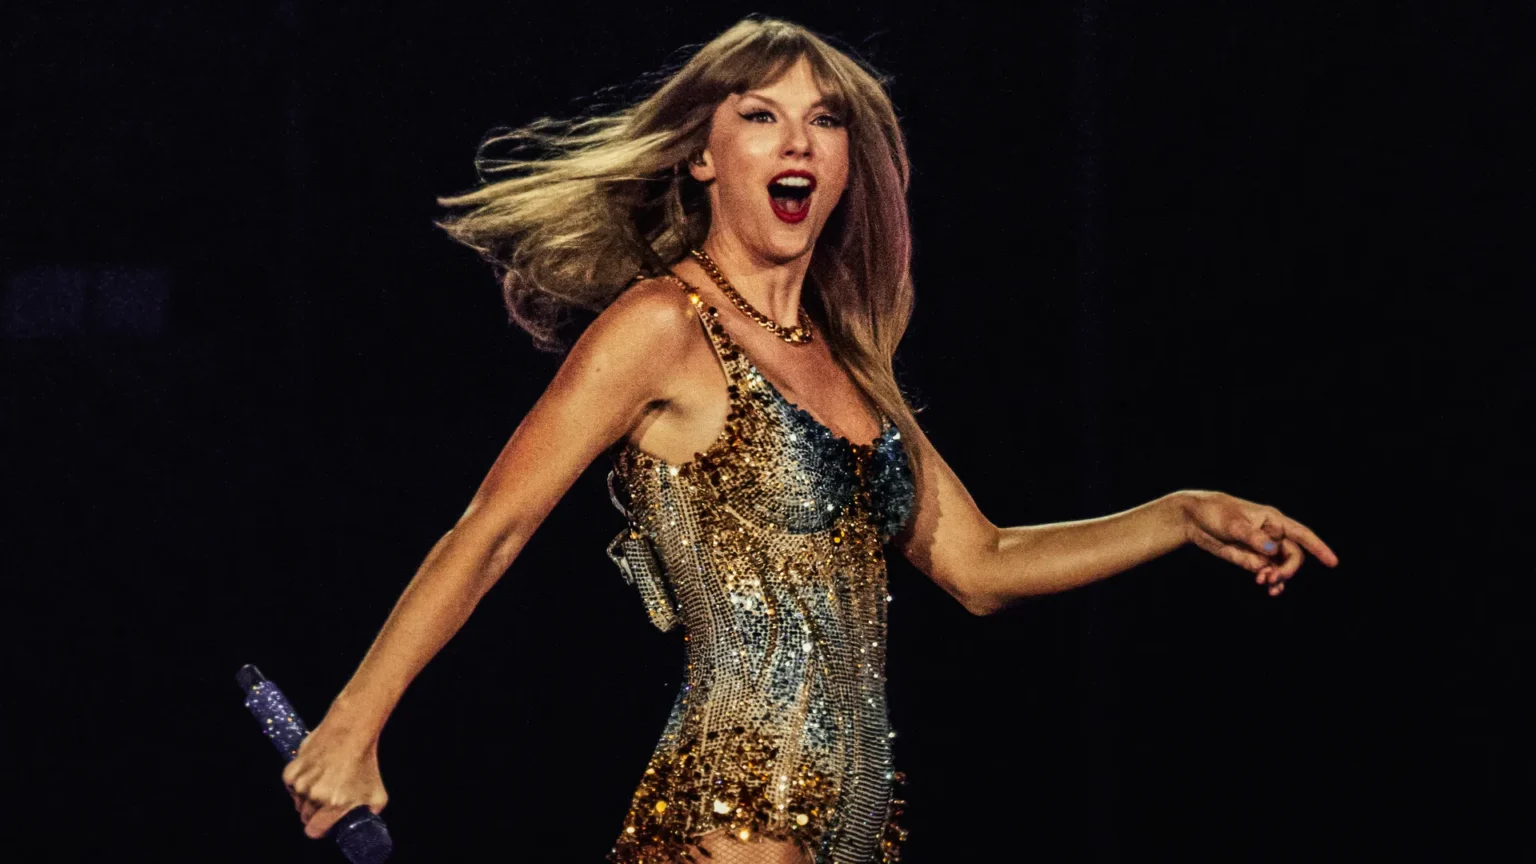 new-york-times-faces-backlash-for-essay-speculating-on-taylor-swifts-sexuality